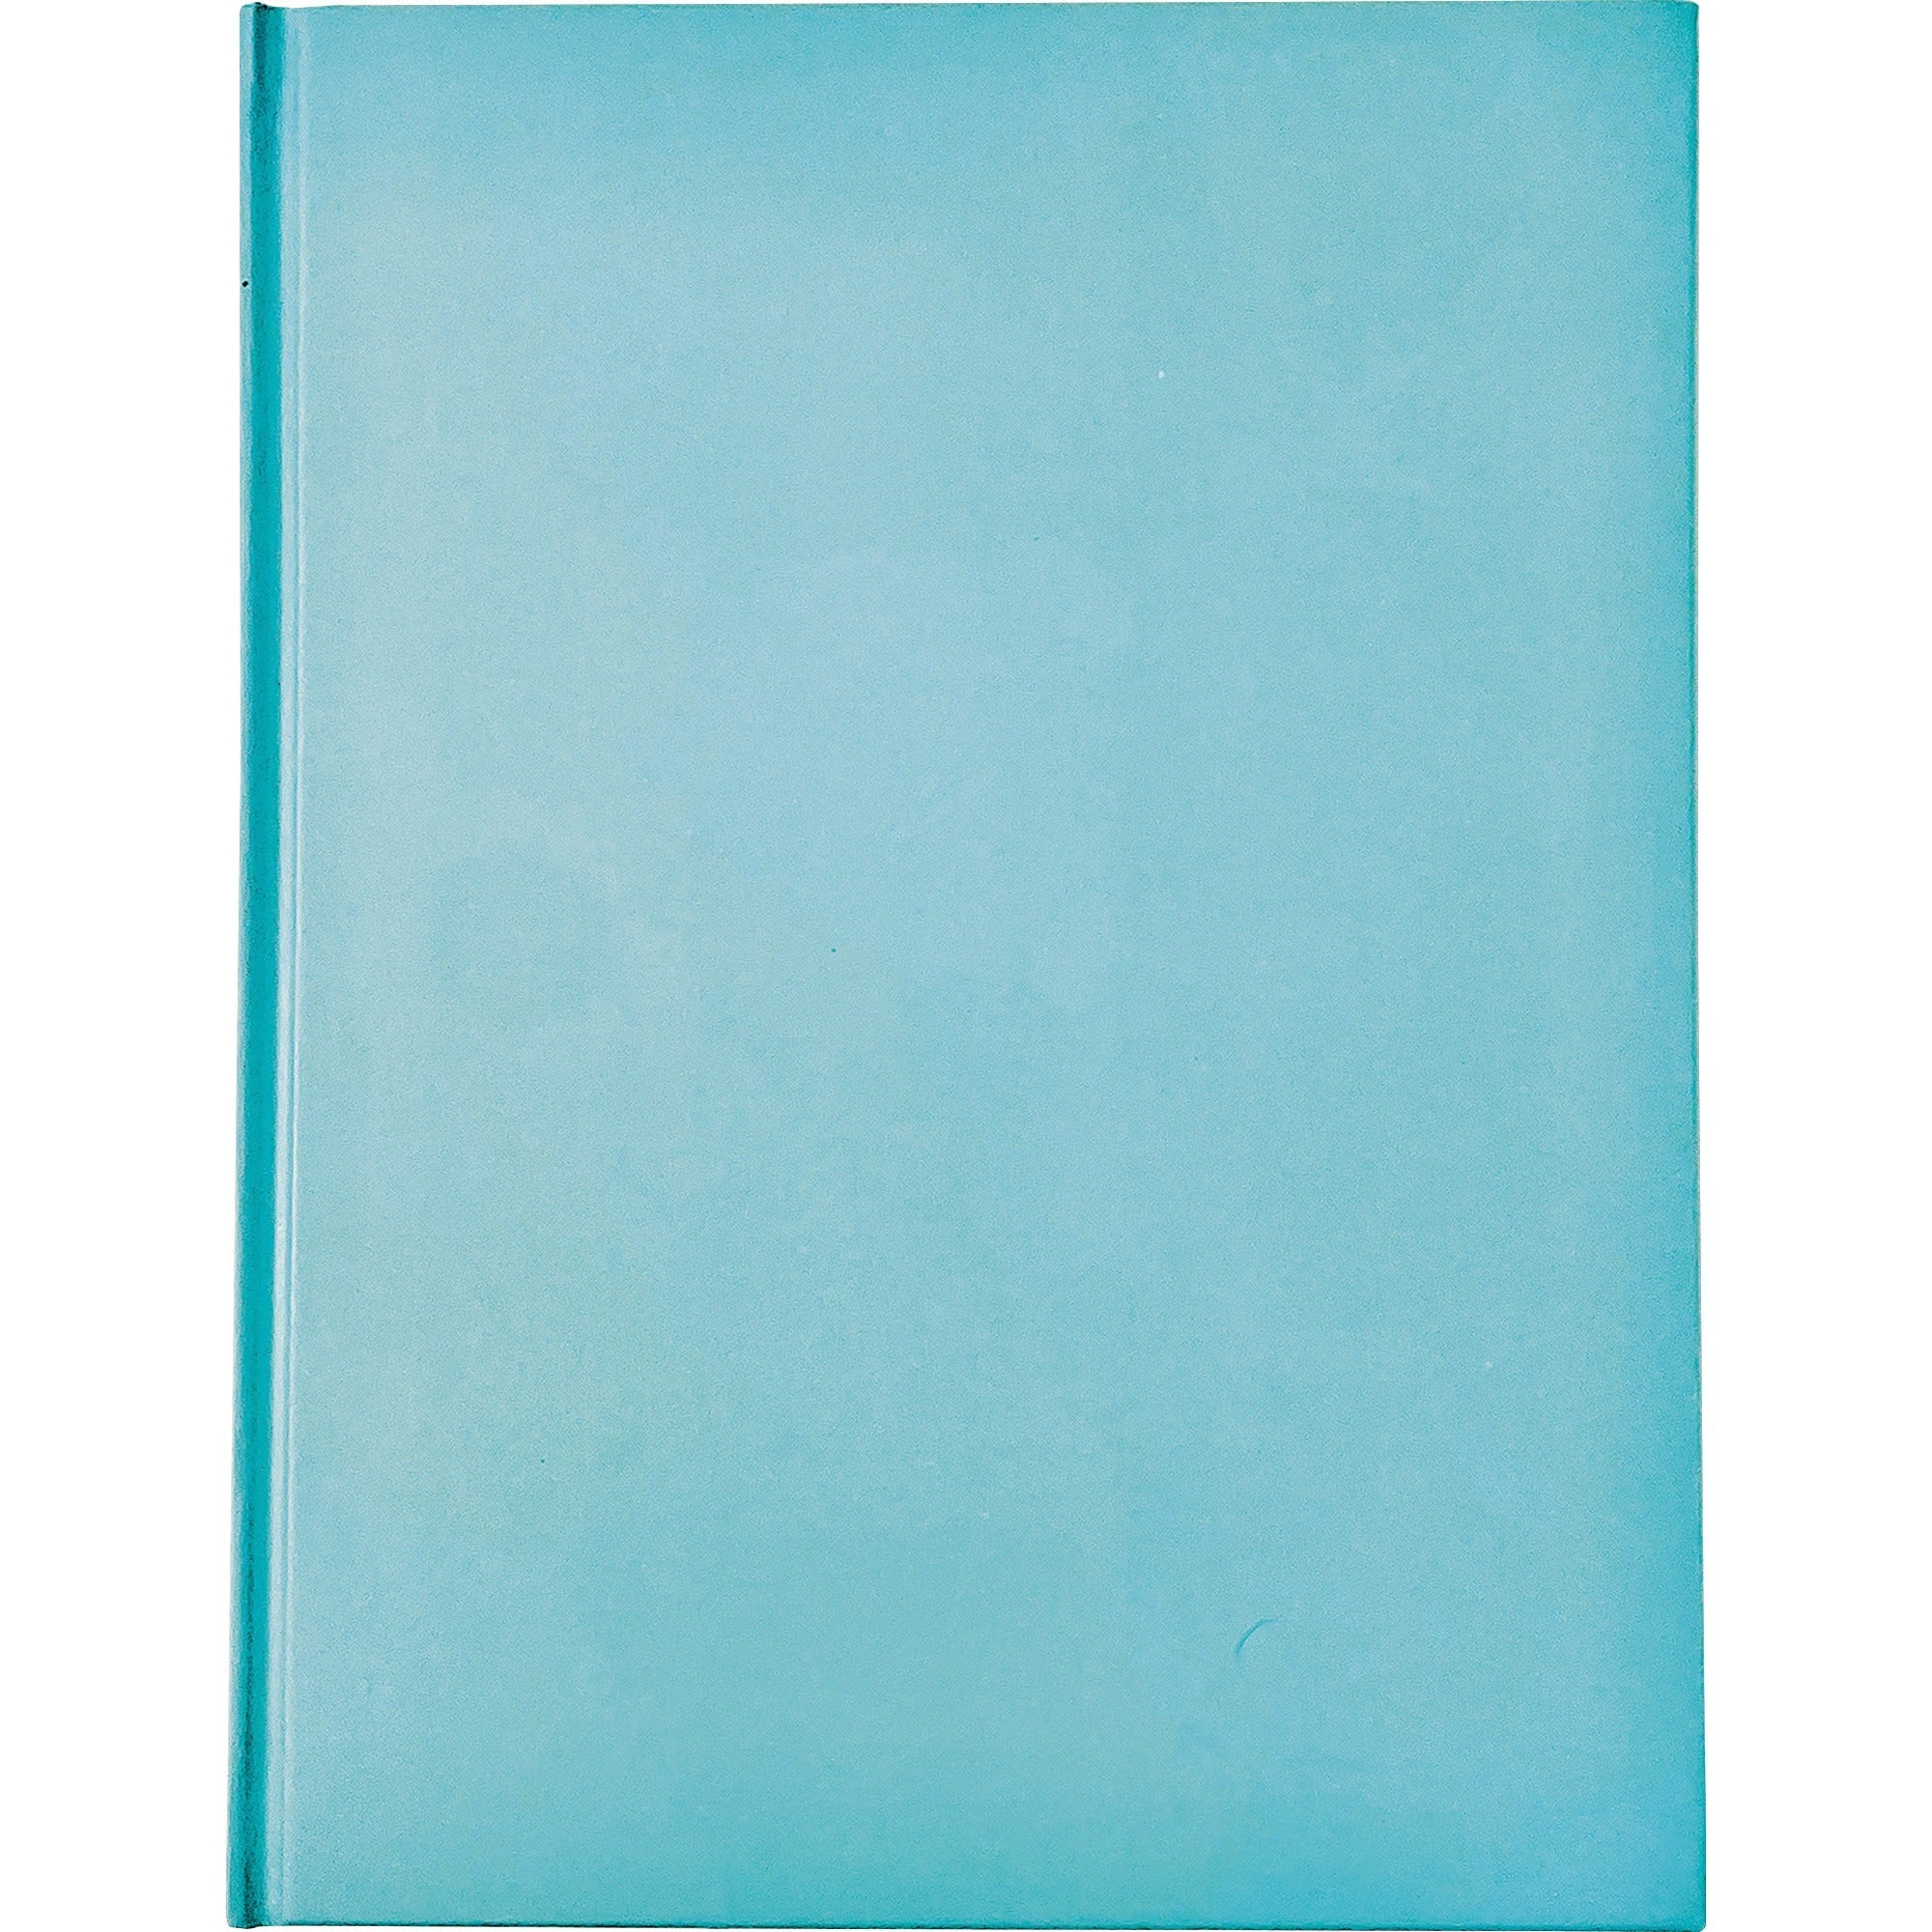 ashley-hardcover-blank-book-28-pages-letter-8-1-2-x-11-blue-cover-hard-cover-durable-1-each_ash10716 - 2